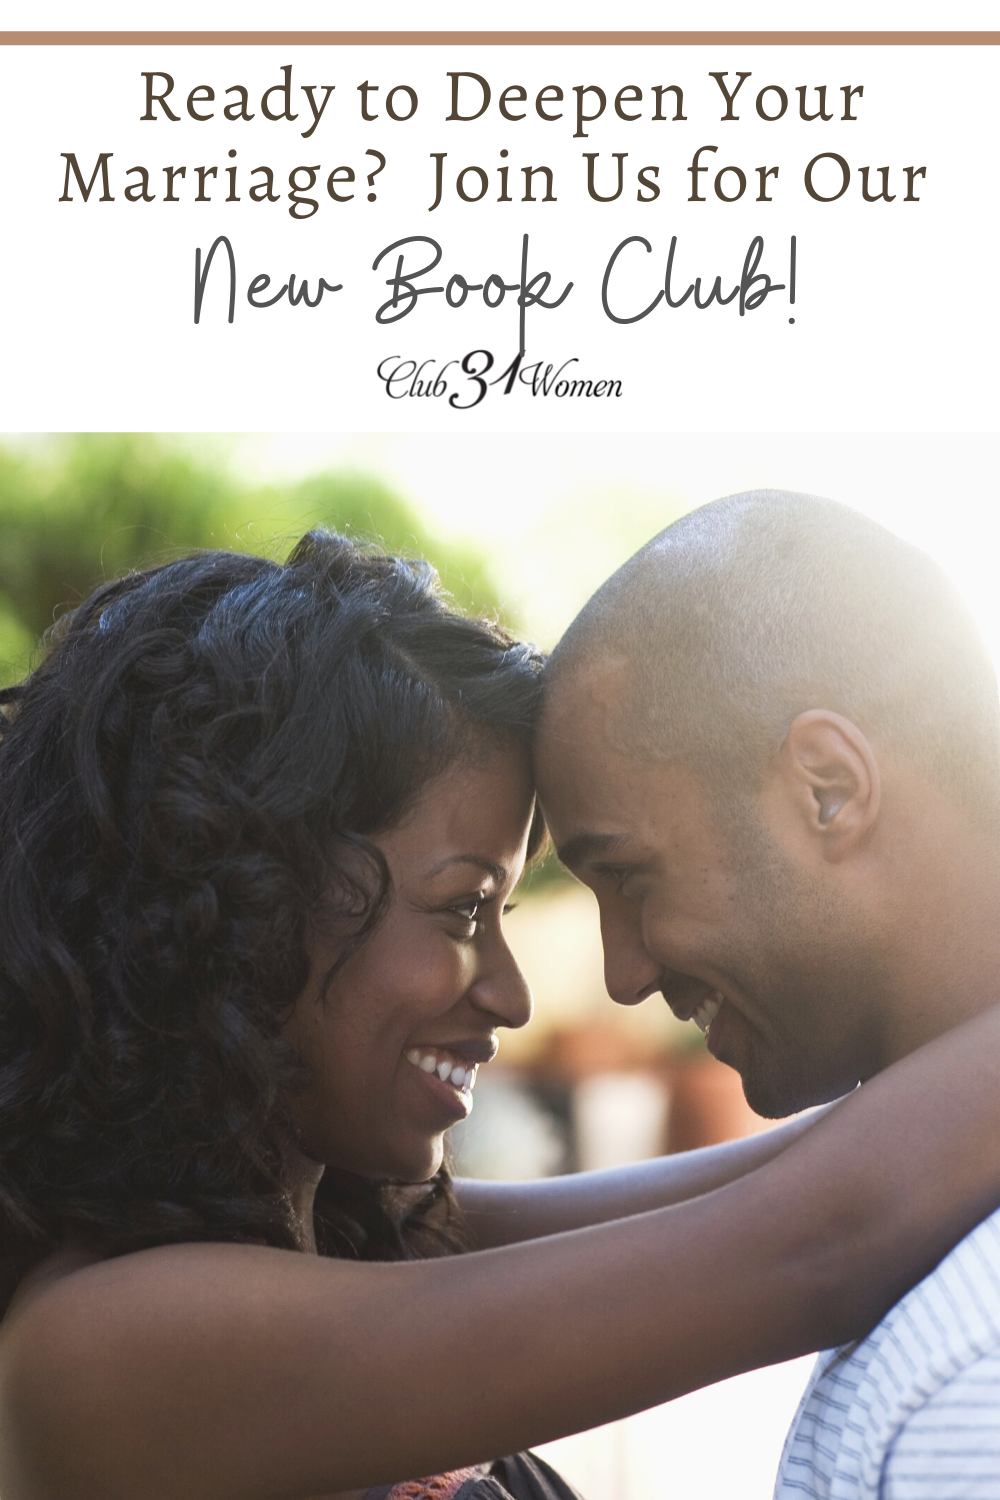 A good book club with a great community sounds so refreshing! We would love you to join us as we deepen our marriages together! via @Club31Women